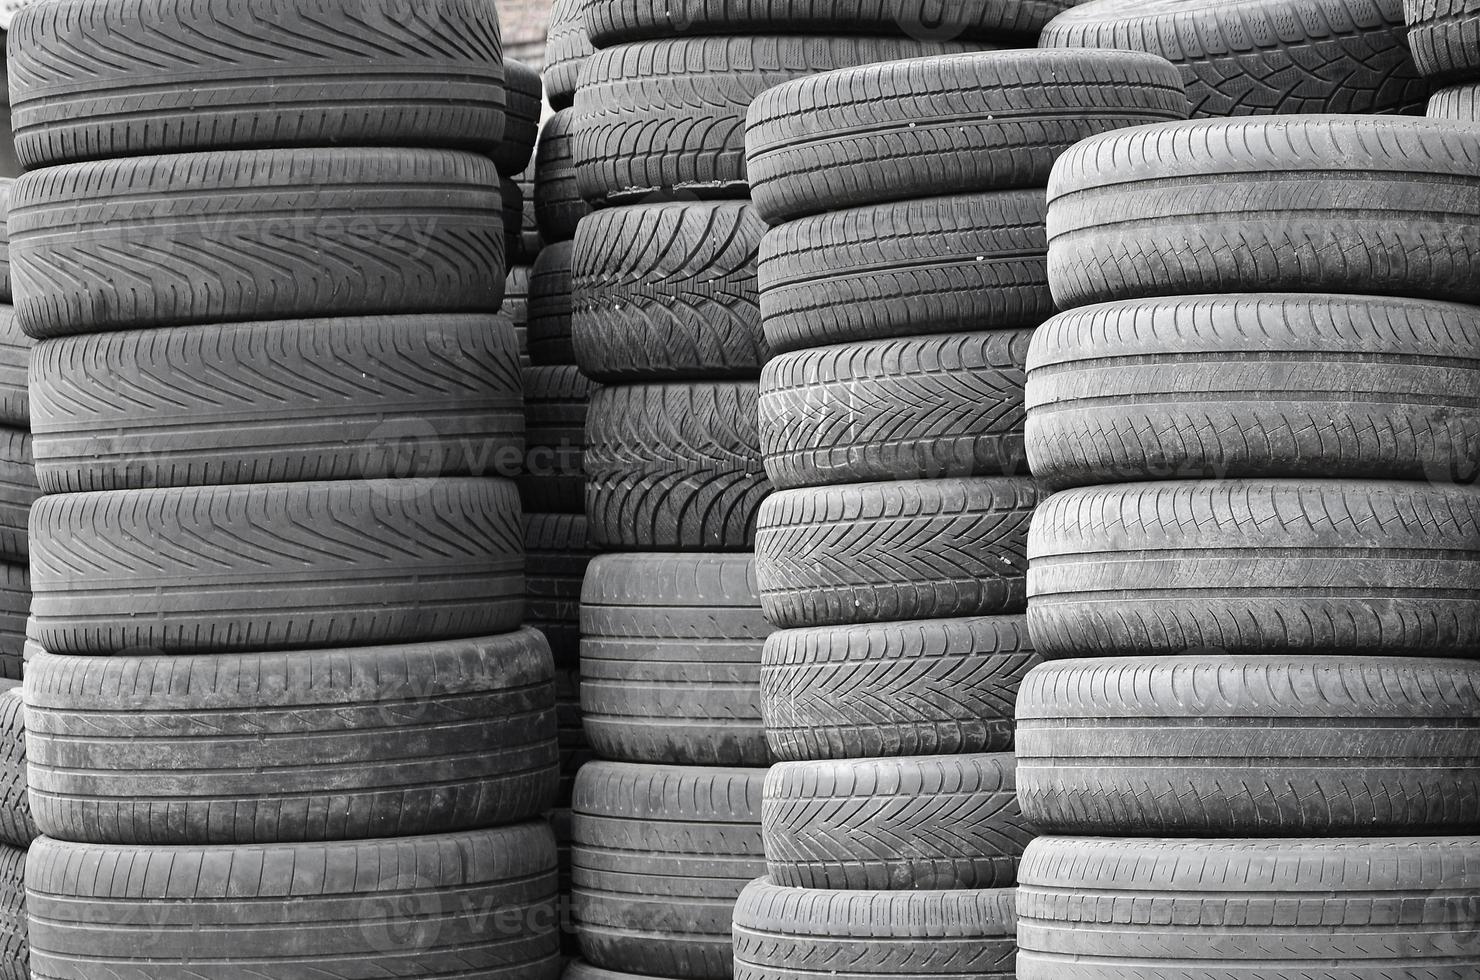 Old used tires stacked with high piles in secondary car parts shop garage photo